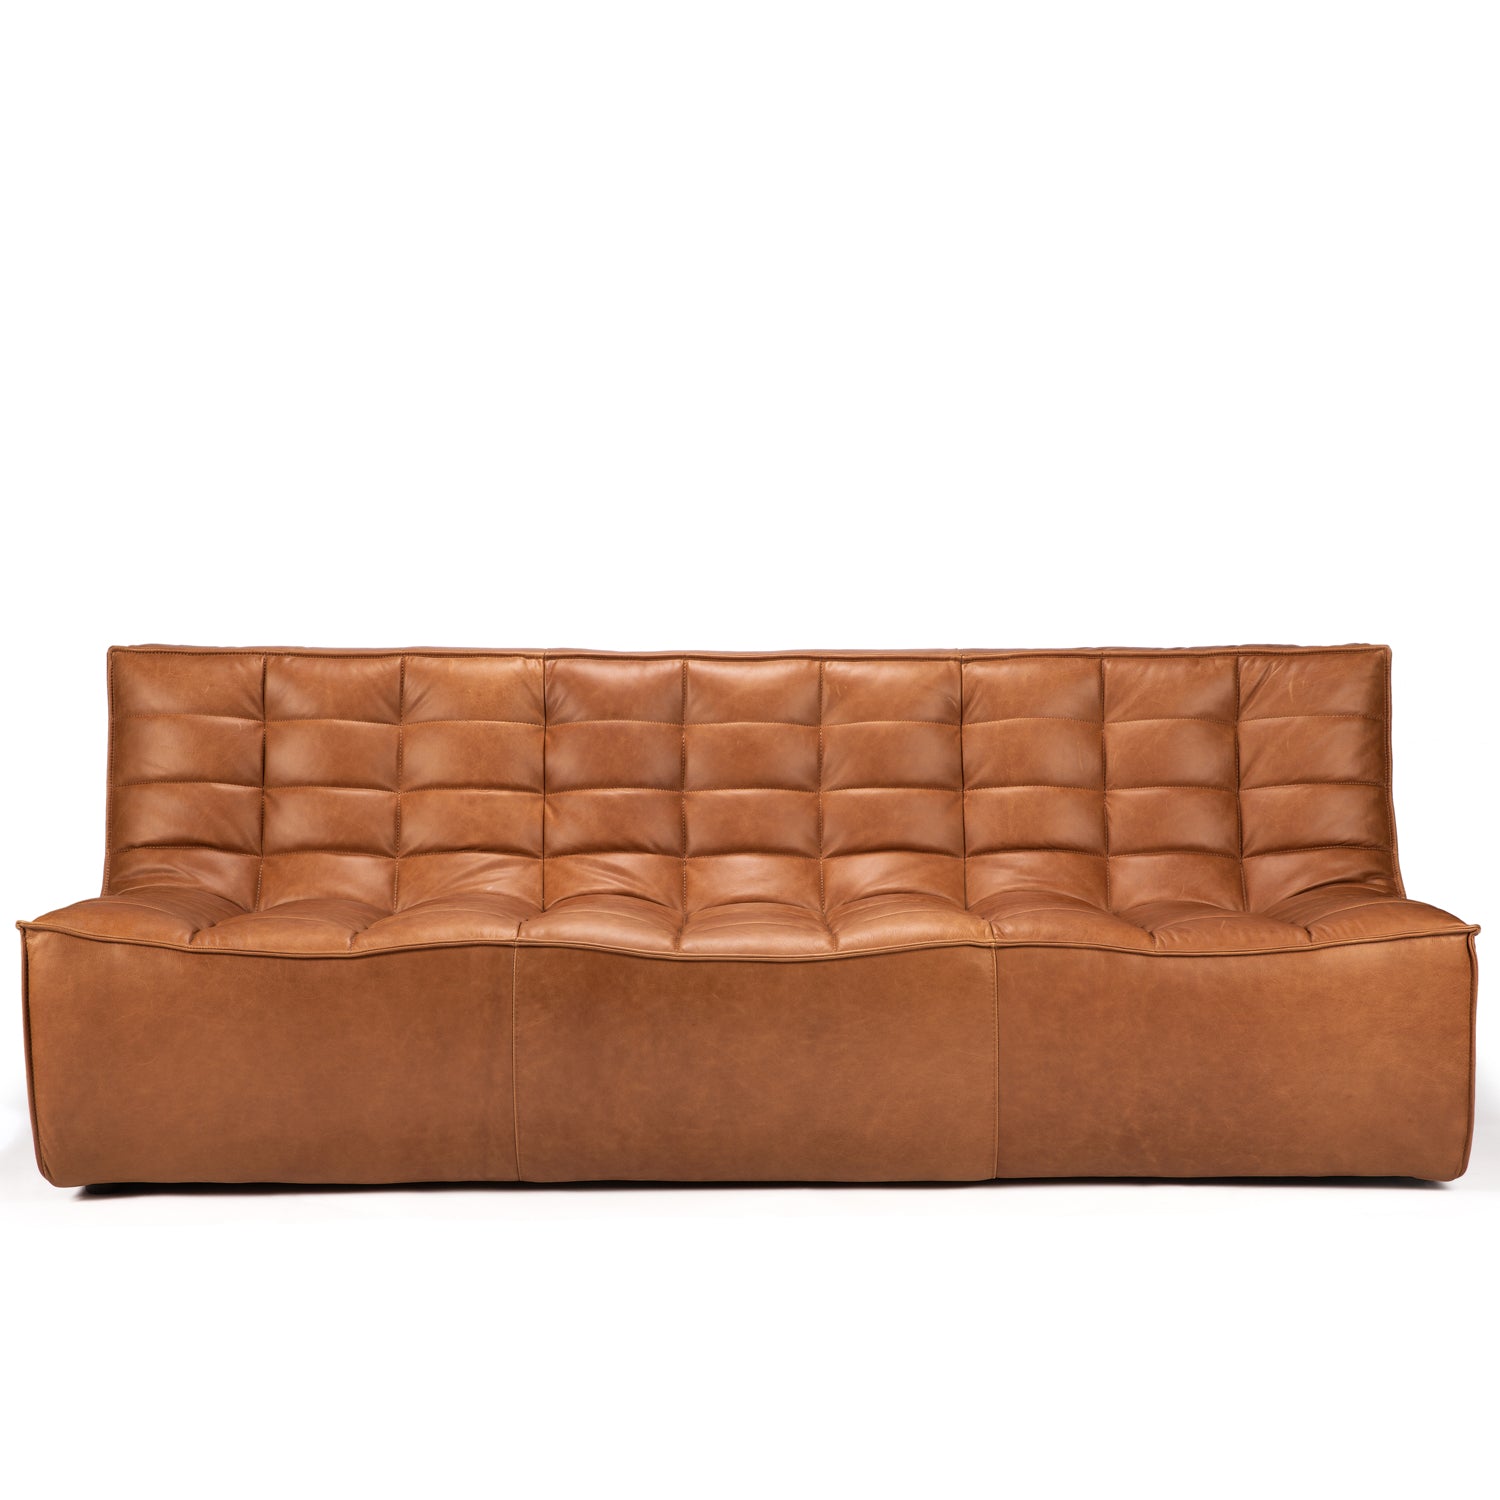 Jacques - Leather 3 Seater - Old Saddle {N701}